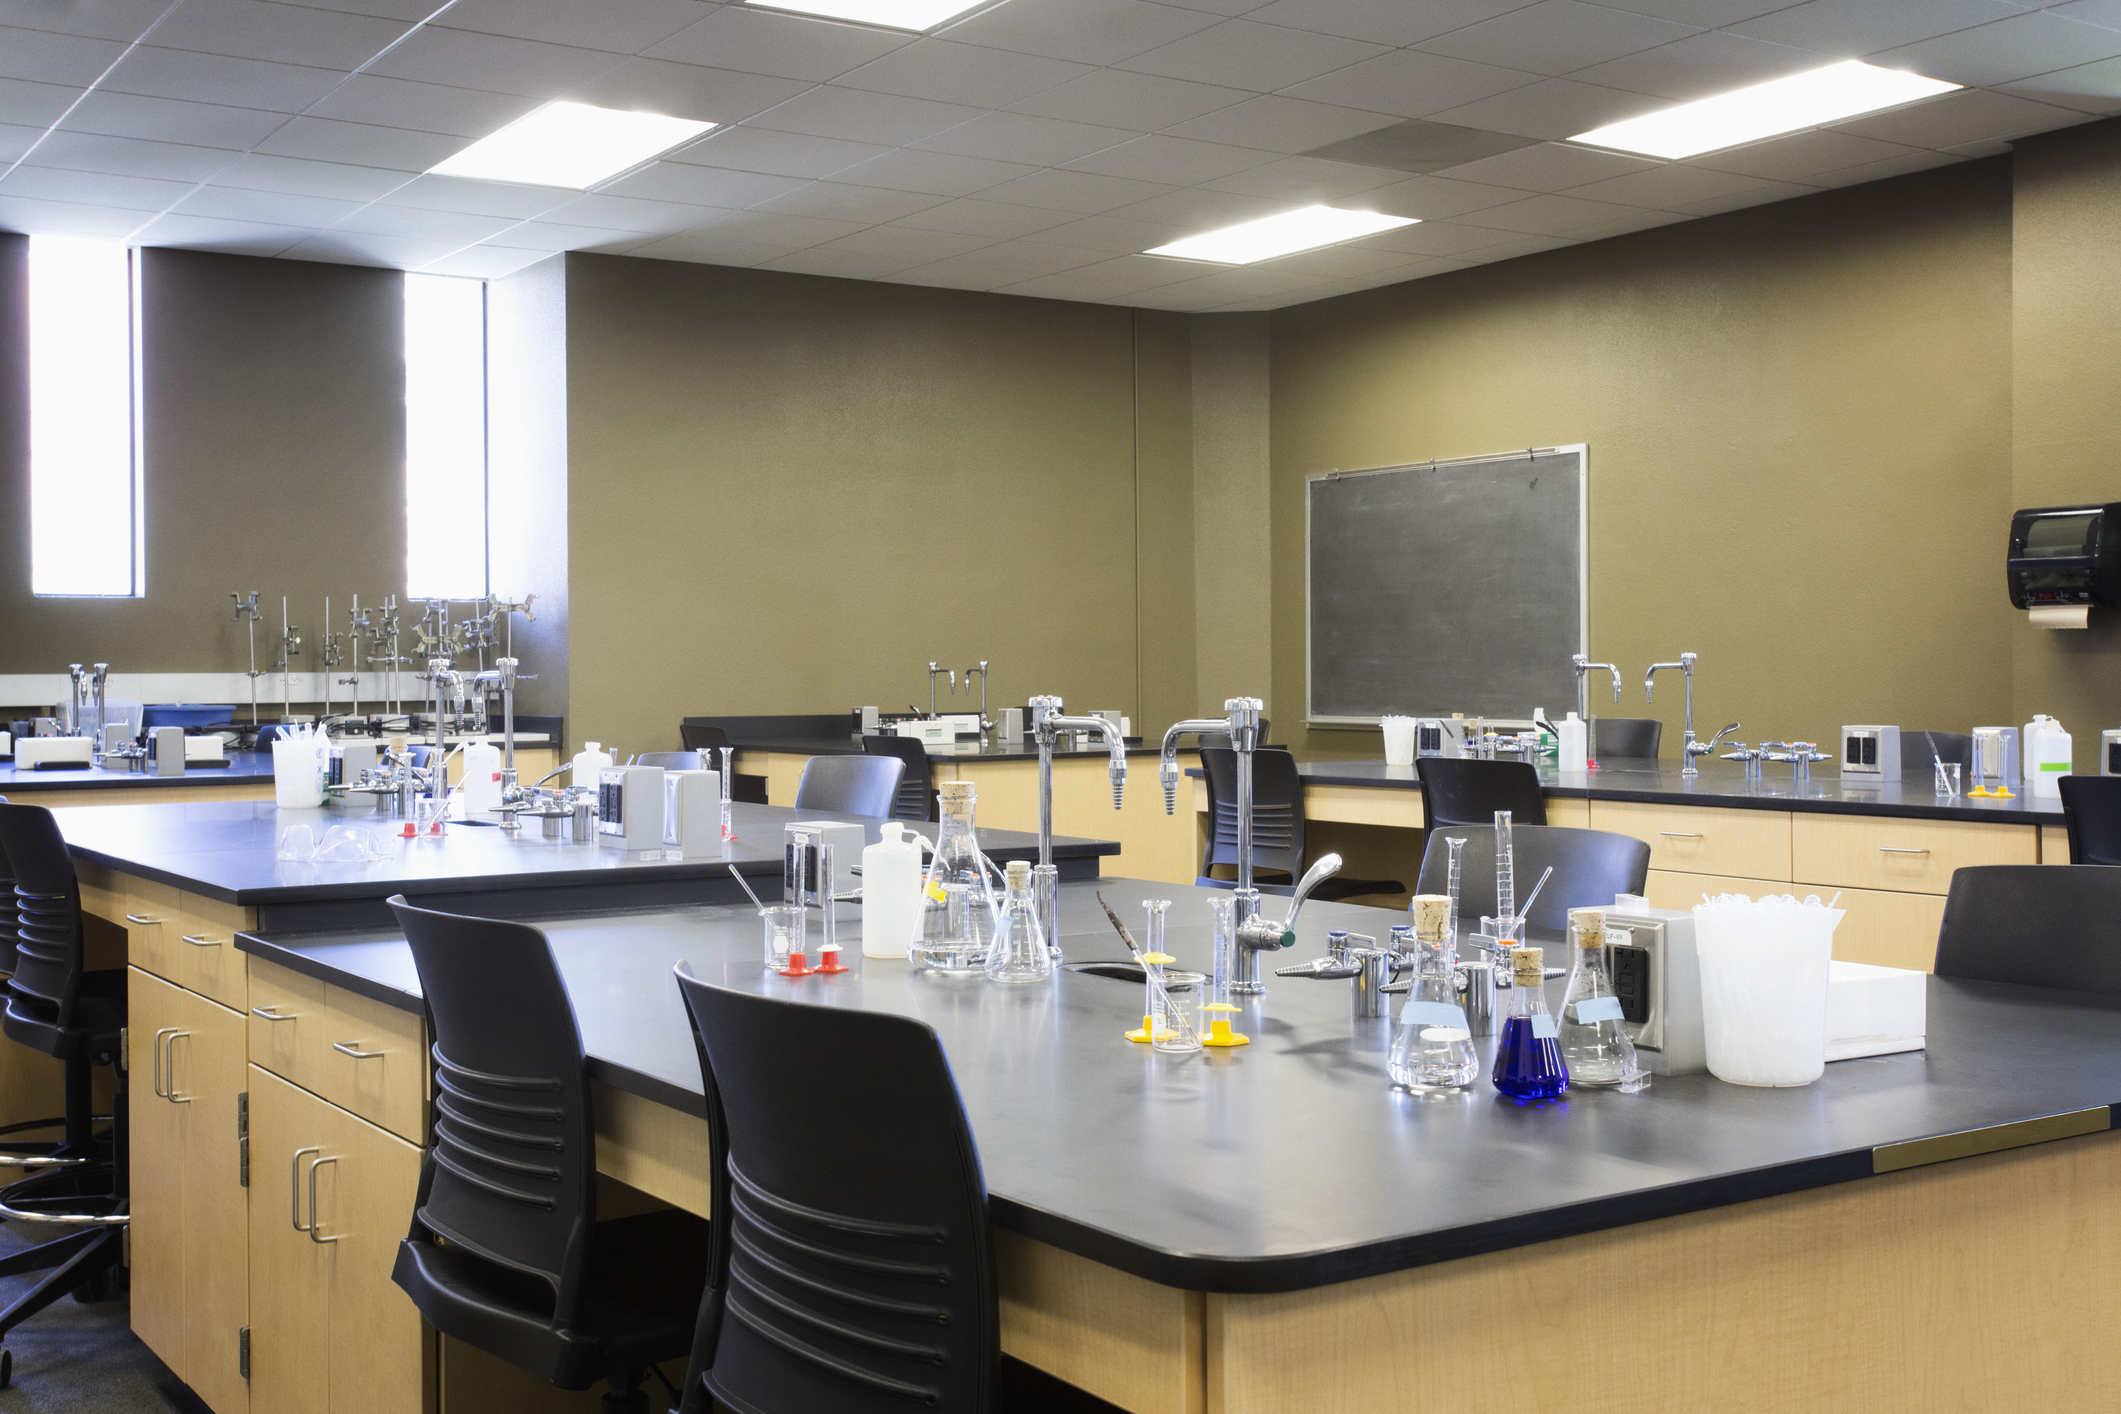 Science laboratory with beakers and test tubes on benches, no individuals present